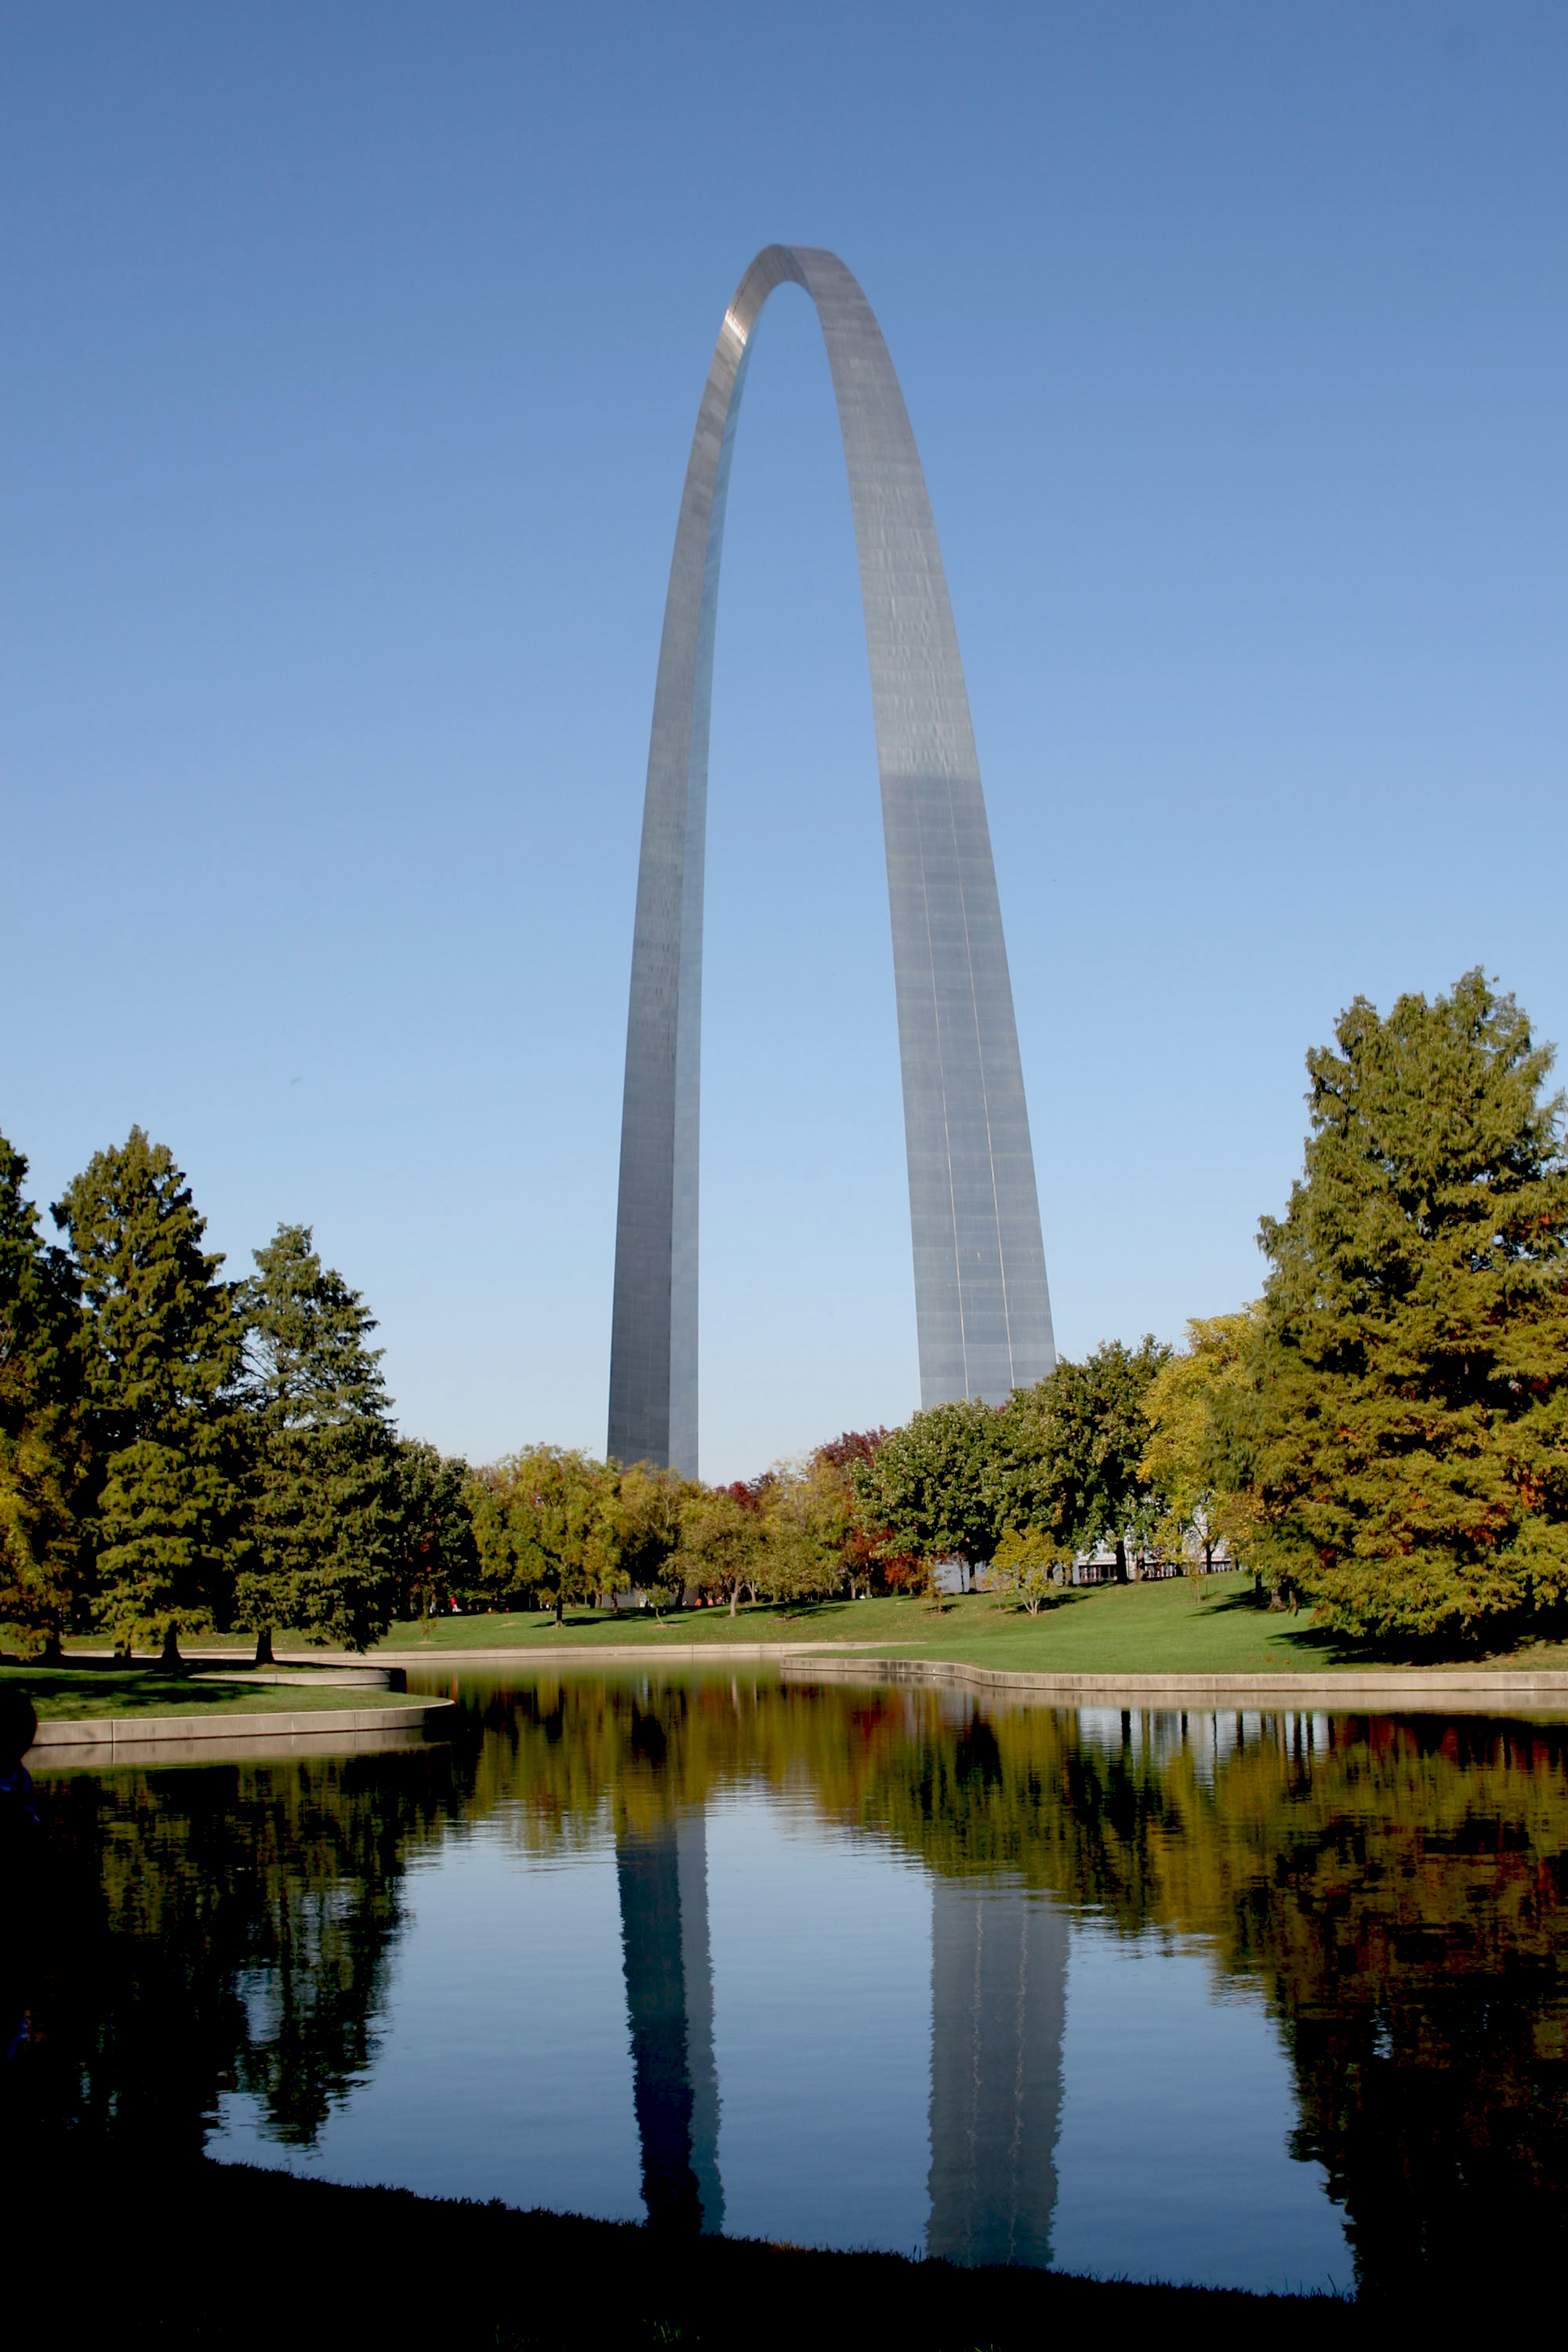 Gateway Arch in St. Louis (Independent City), Missouri | Historic Places - www.semadata.org